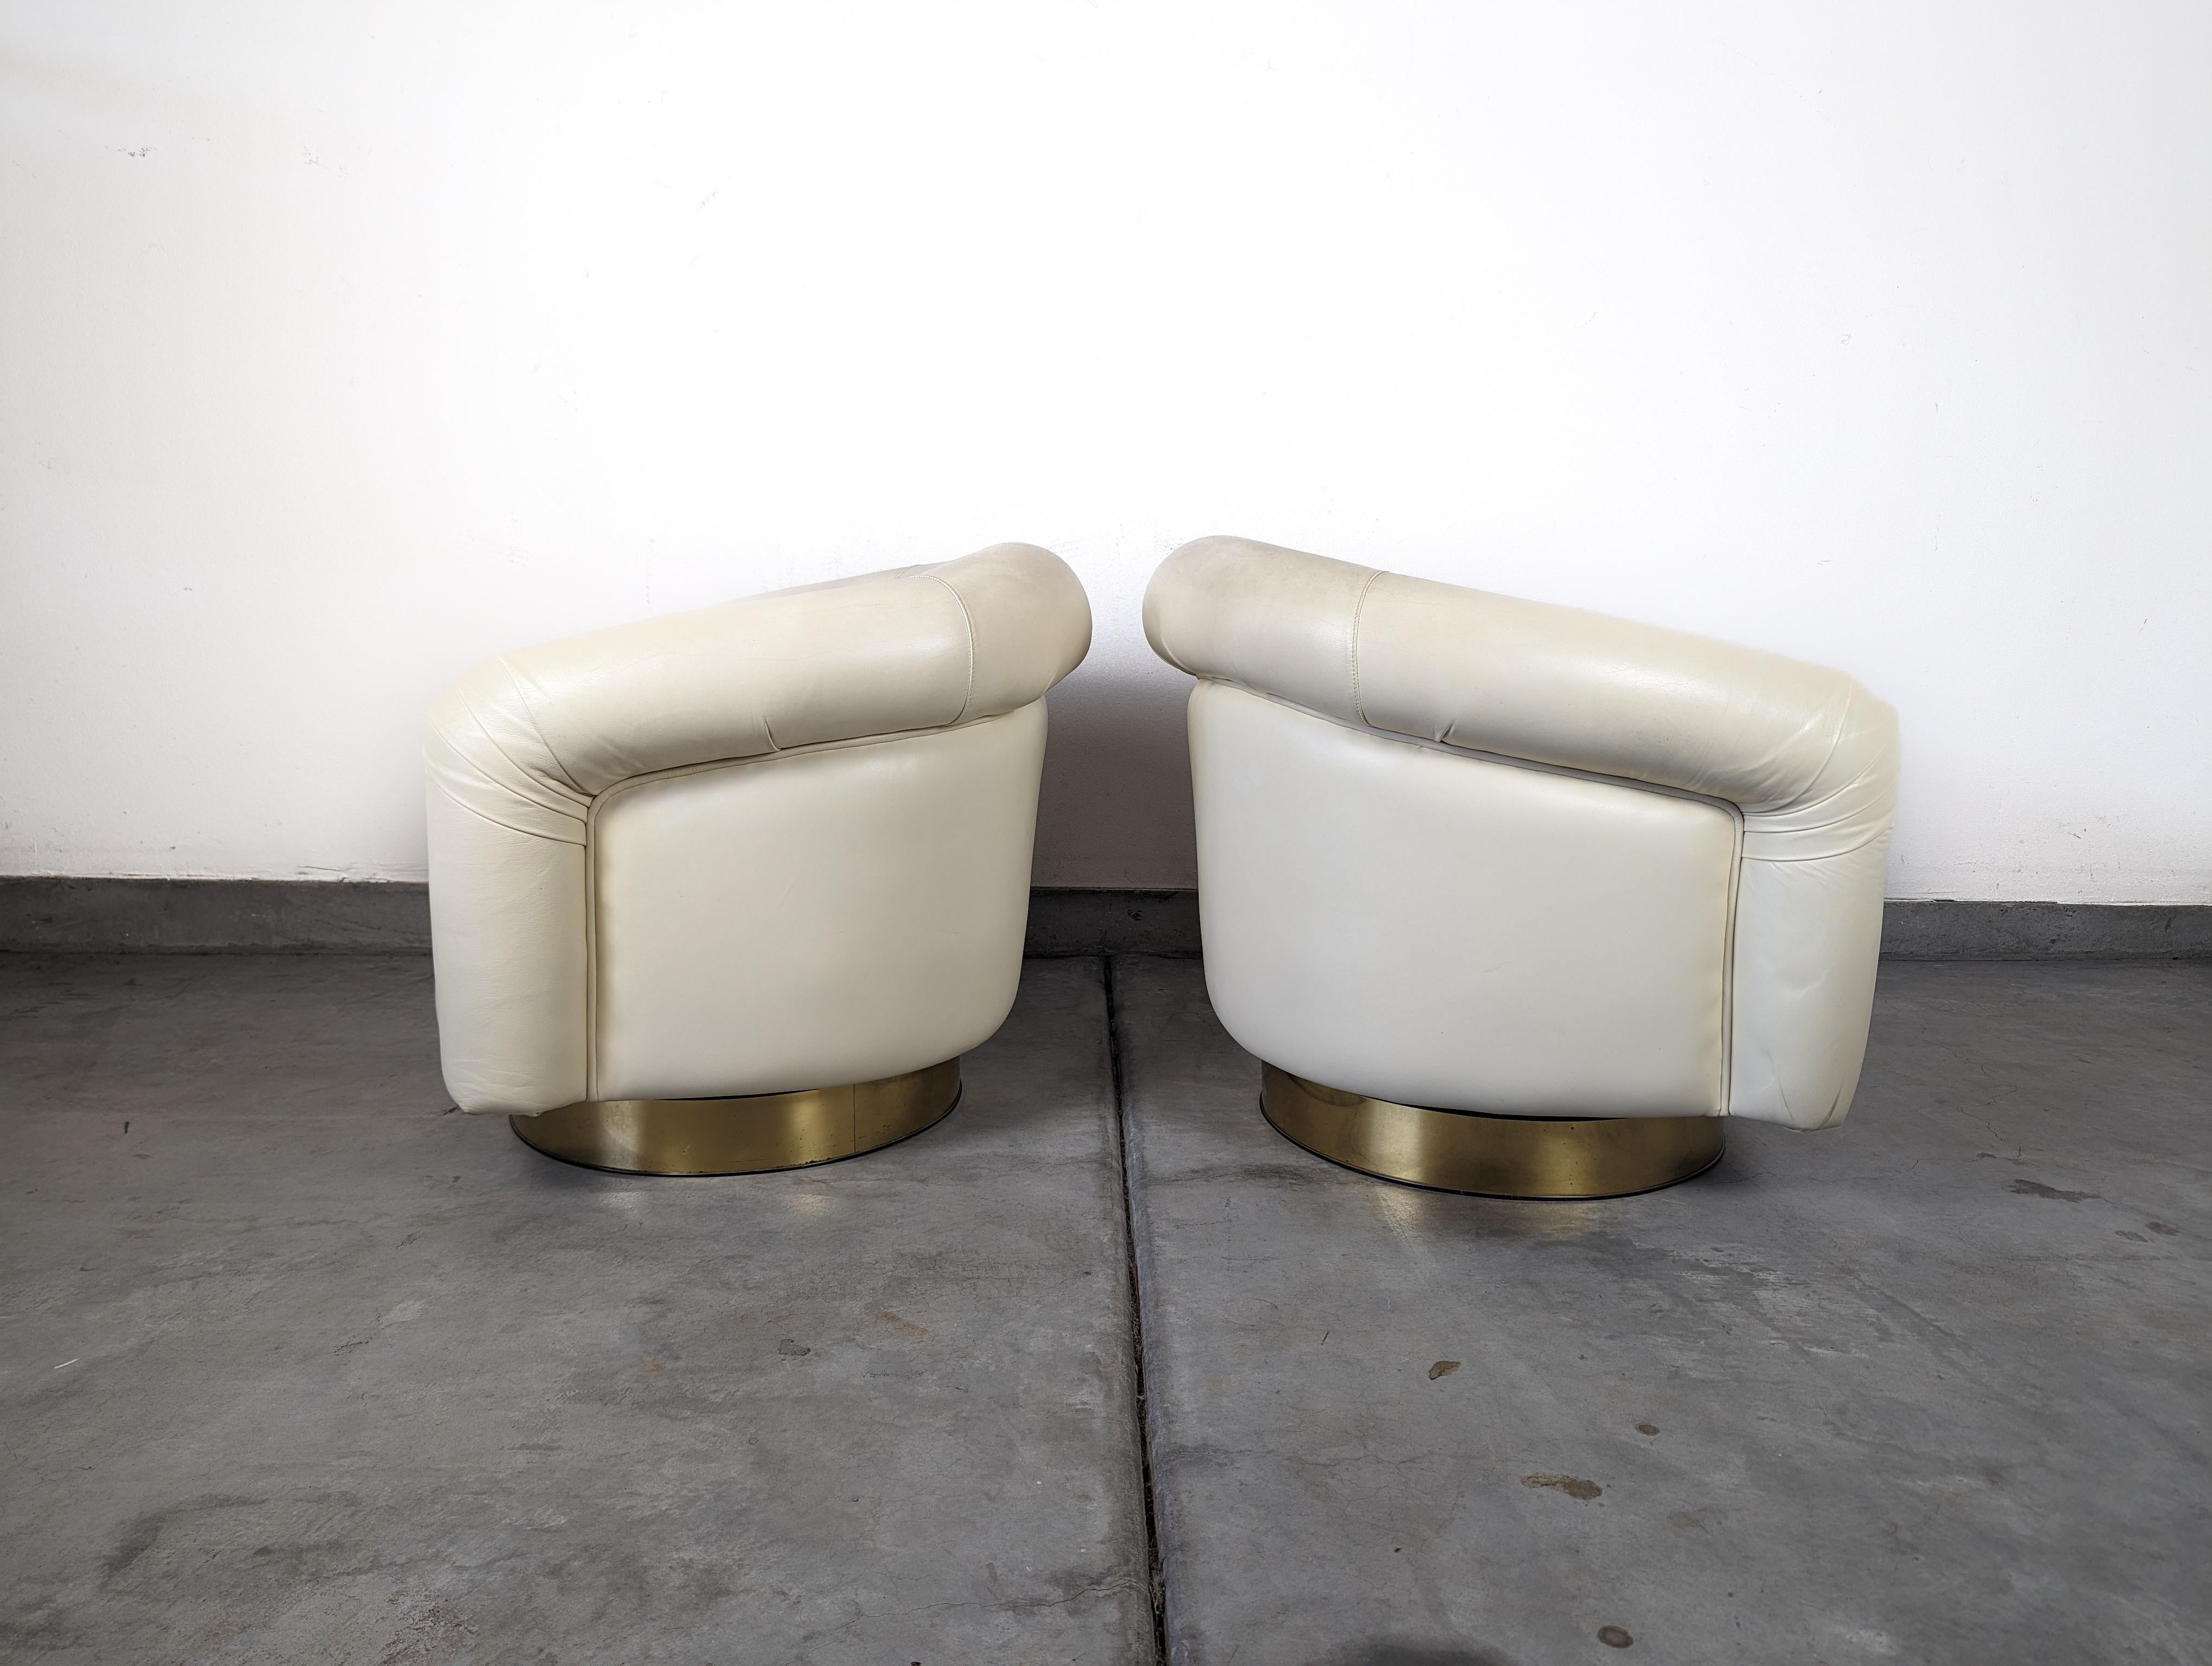 Late 20th Century Leather Tilt Swivel Lounge Chairs by Milo Baughman for Thayer Coggin, c1970s For Sale